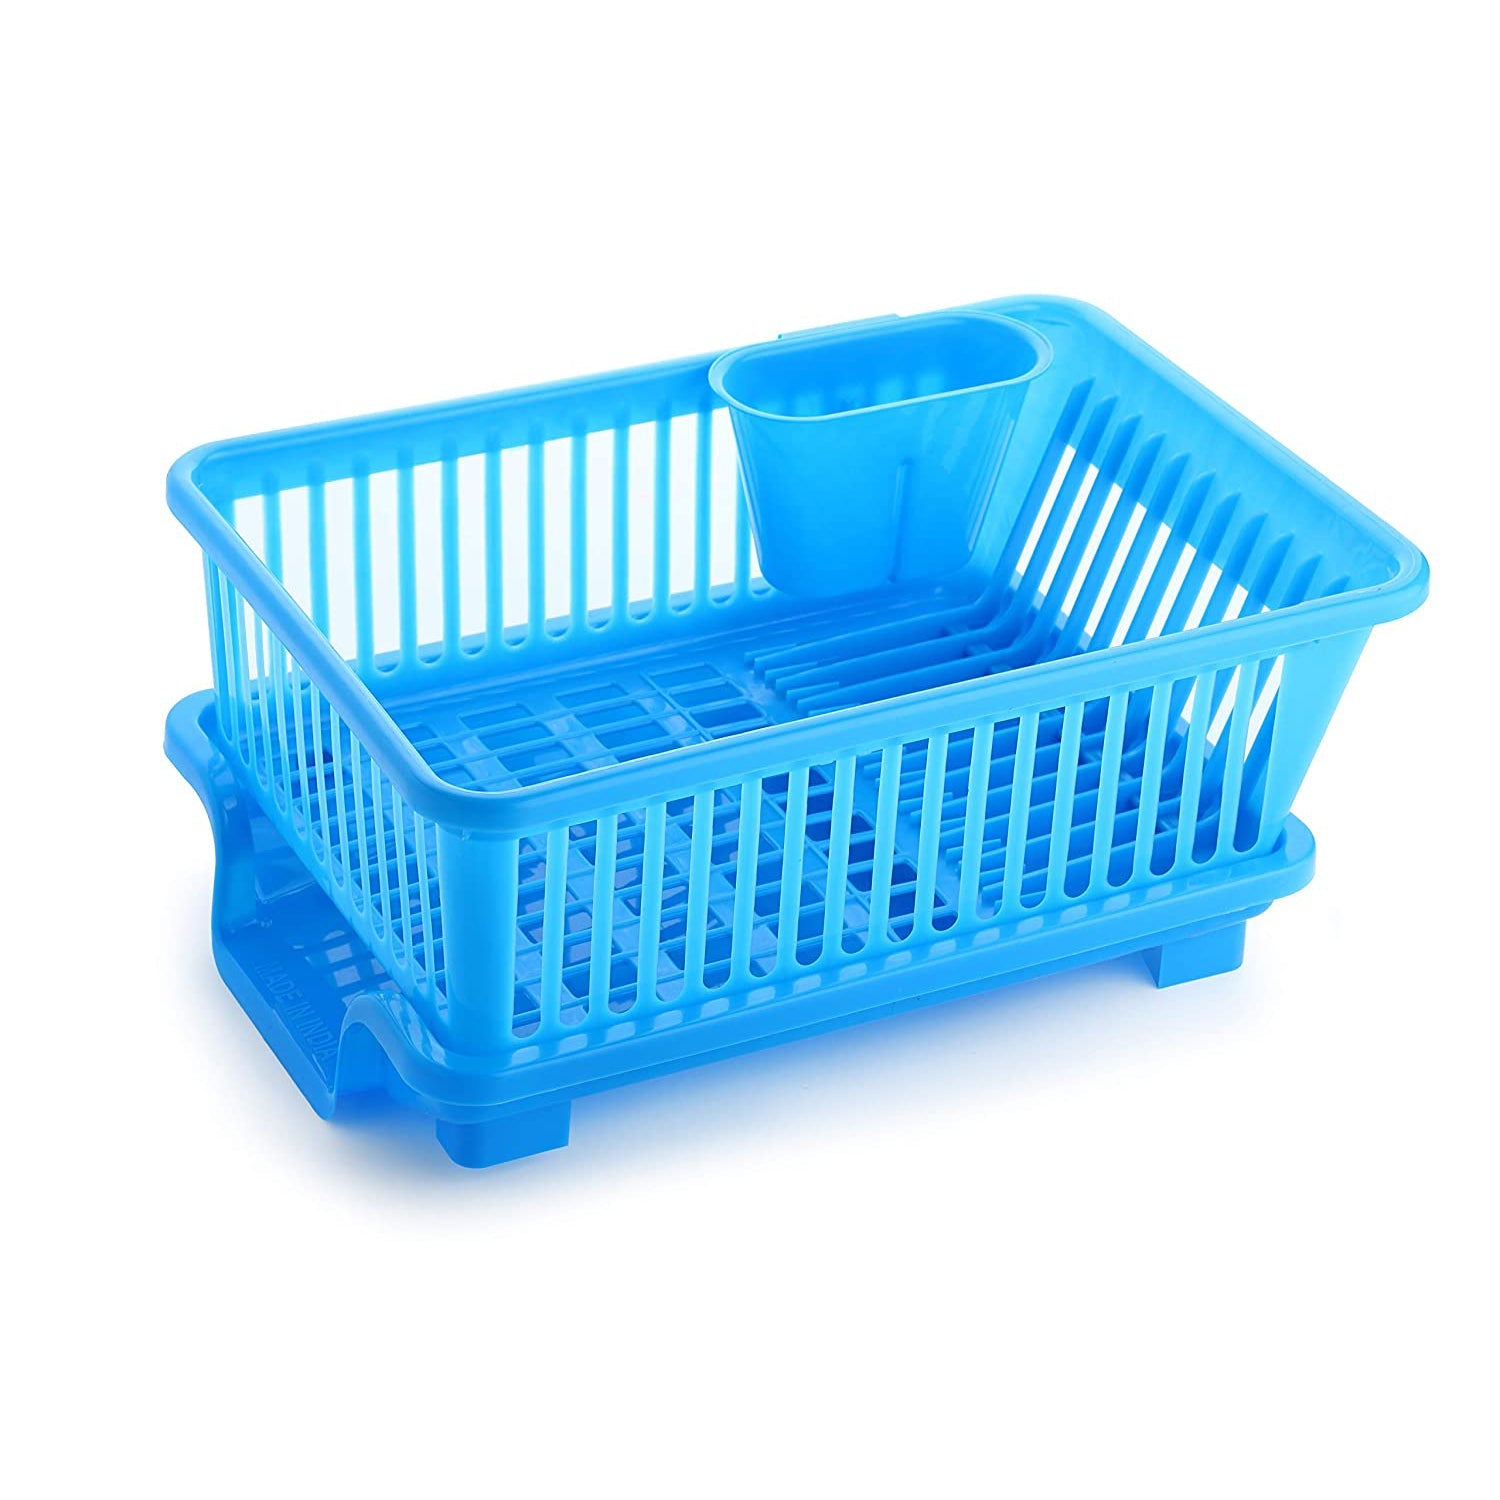 8132 Ganesh 3 in 1 Large Plastic Kitchen Sink Dish Rack Drainer Drying Rack Washing Basket with Tray for Kitchen, Dish Rack Organizers, Utensils Tools Cutlery DeoDap